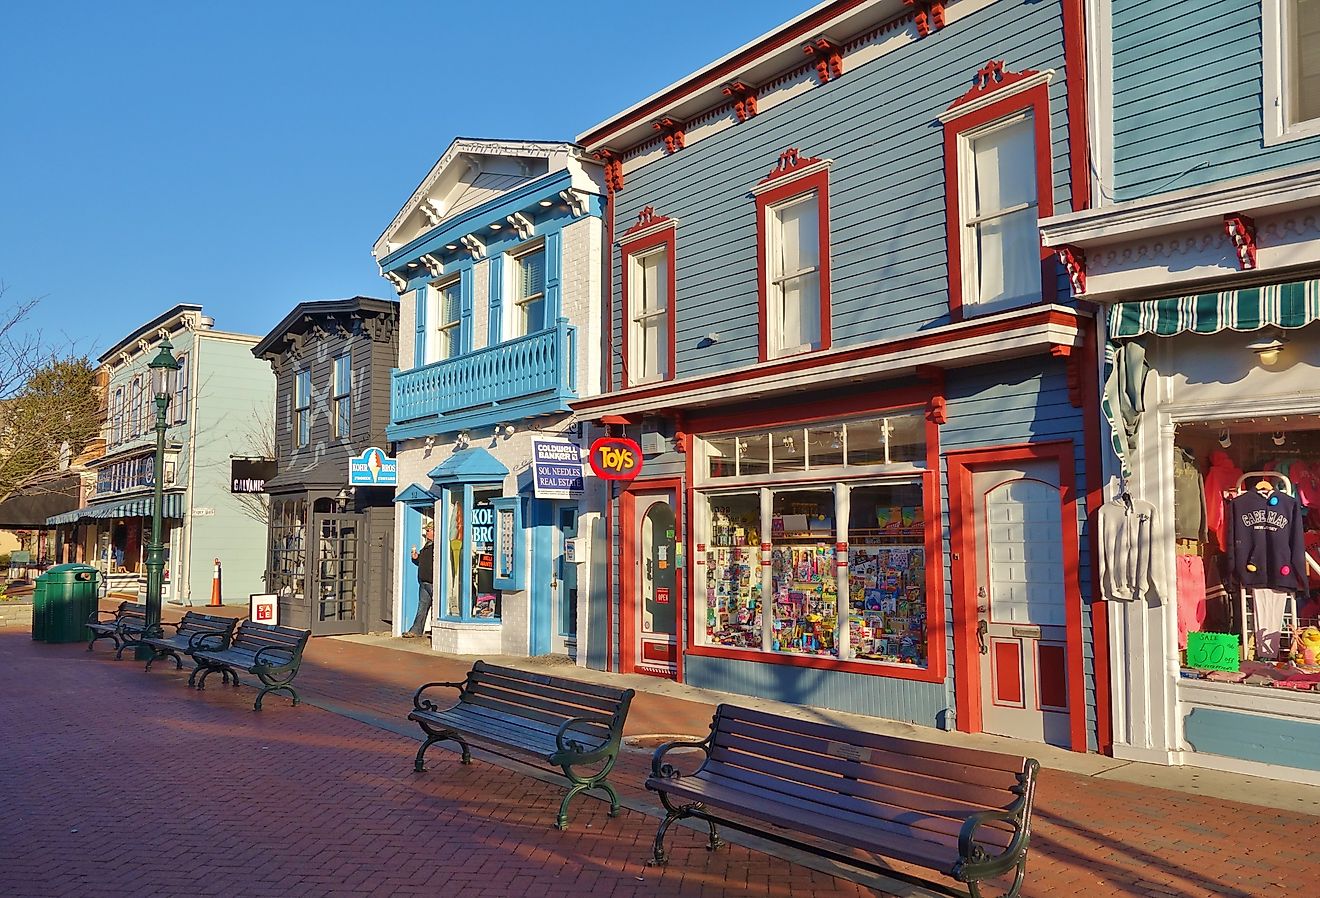 View of the Washington Street Mall, a pedestrian shopping area in downtown Cape May, at the southern tip of Cape May Peninsula on the New Jersey shore. Image credit EQRoy via Shutterstock